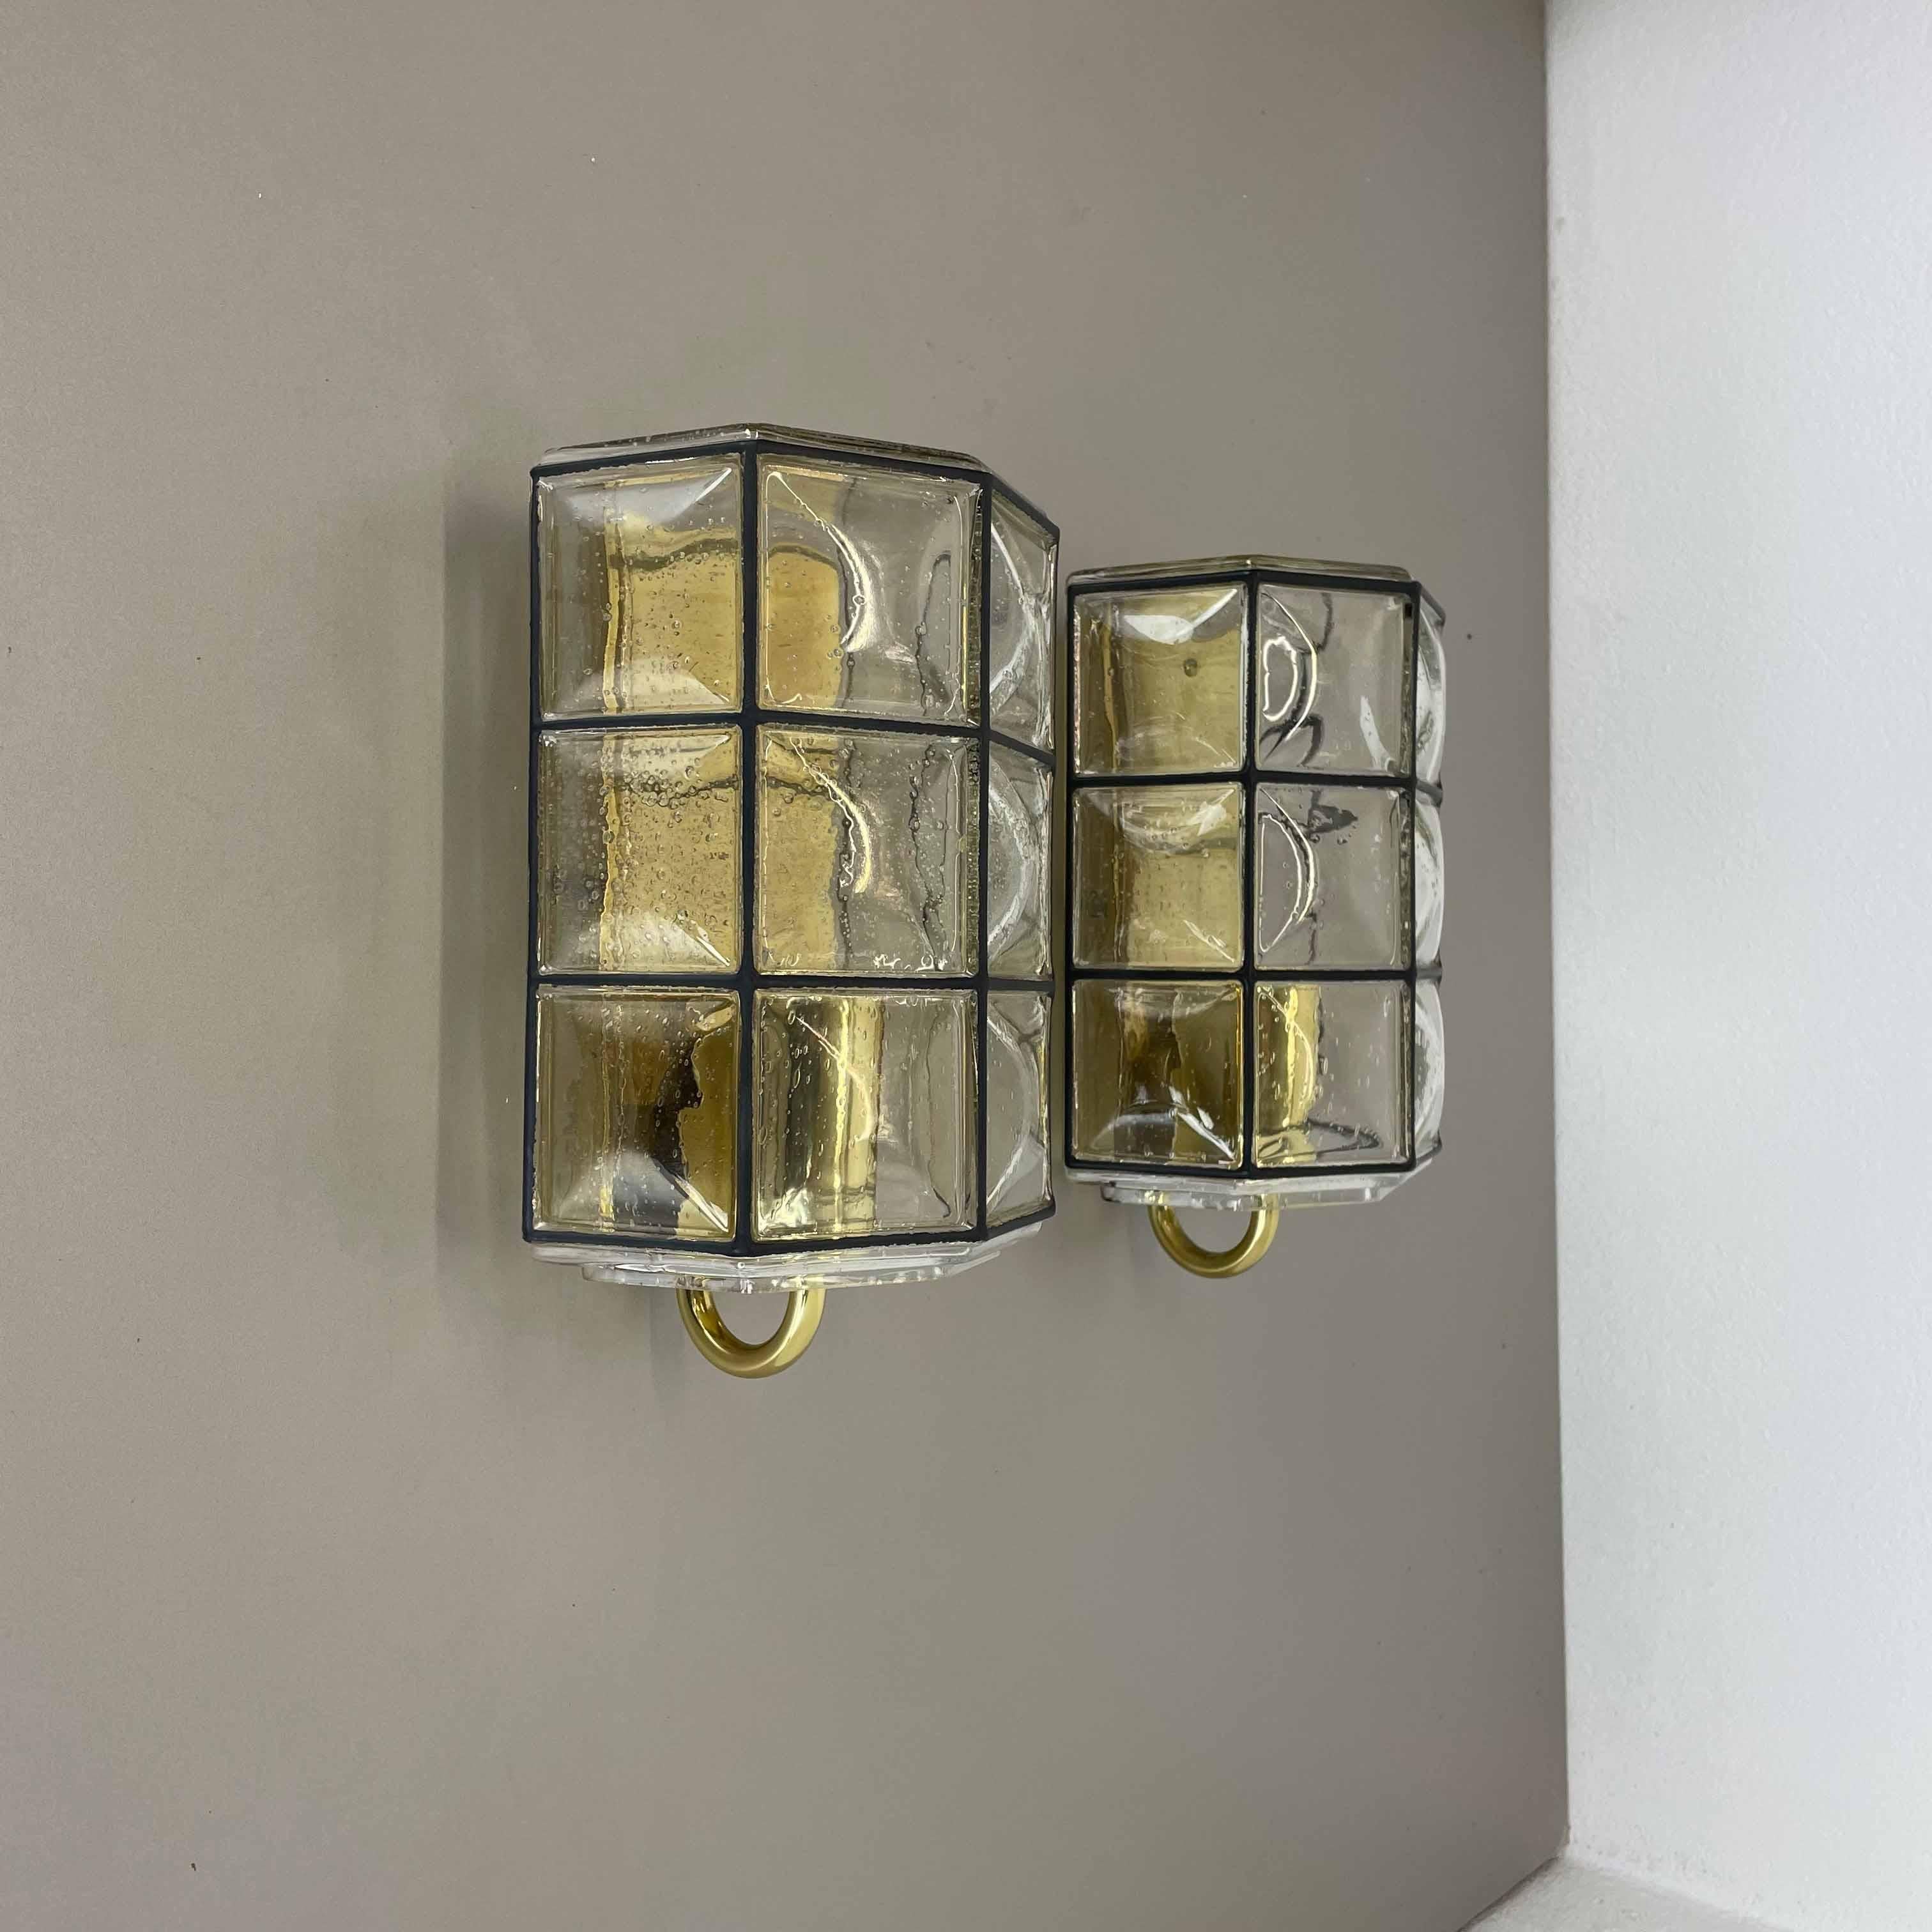 Article:

set of two wall lights


Producer:

Glashütte Limburg, Germany



Origin:

Germany



Age:

1970s



Original 1970s set of modernist German wall Light made of high quality glass with black lines within the glass. the